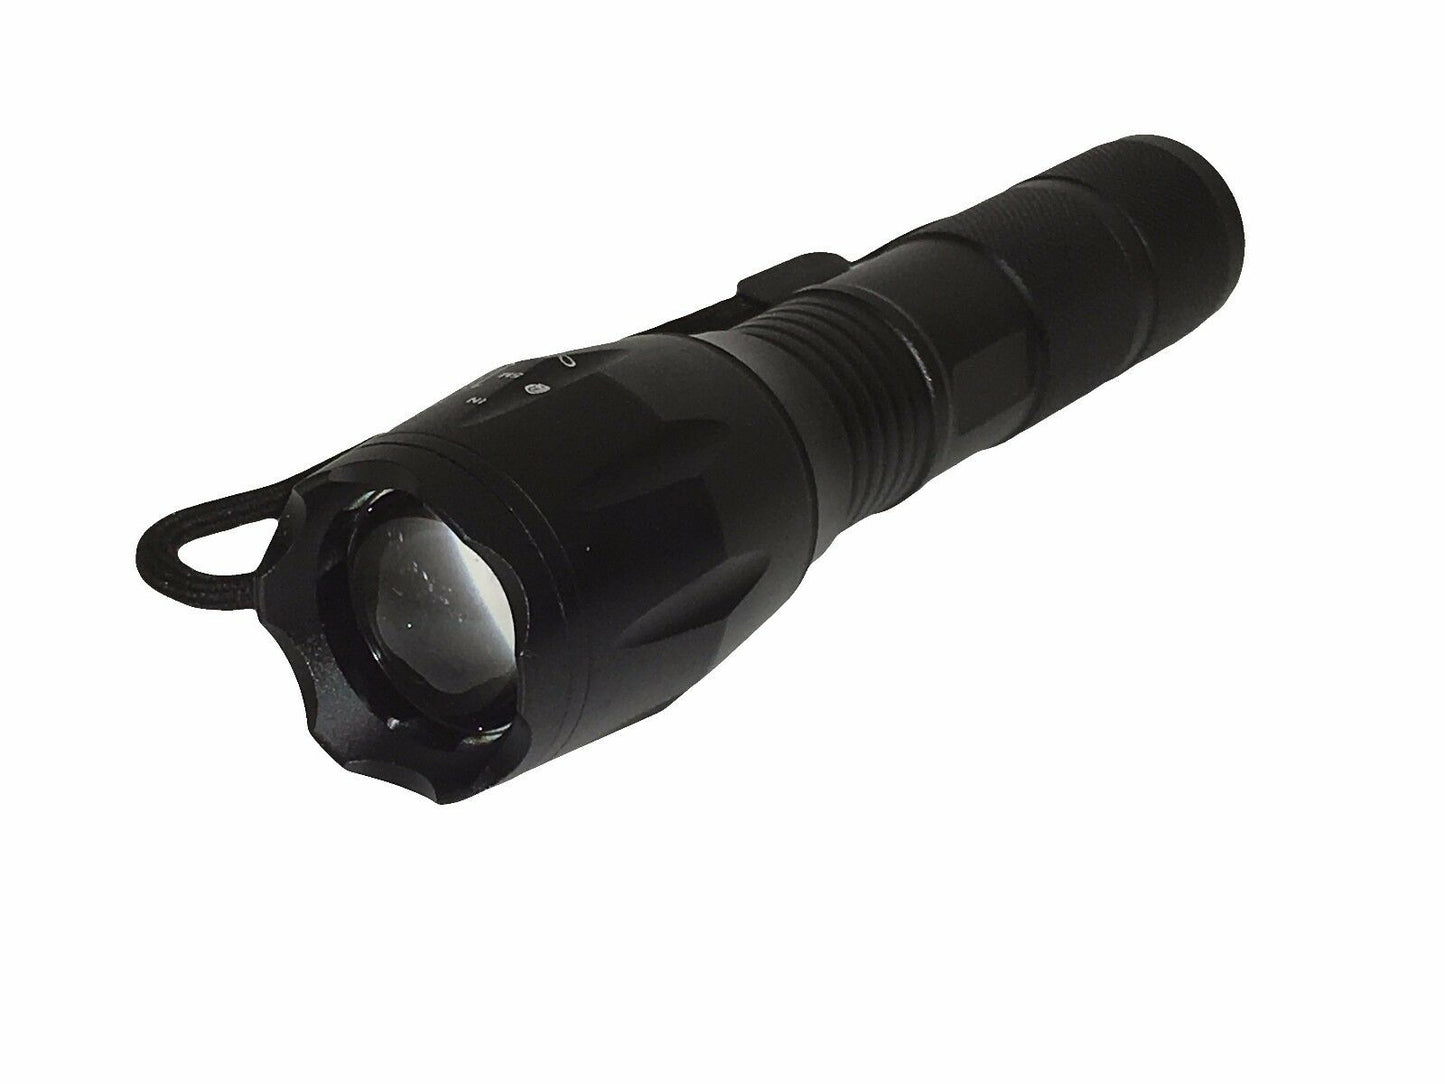 Torch Lamp Light 5000lms Zoom able CREE T6 LED Flashlight Focus